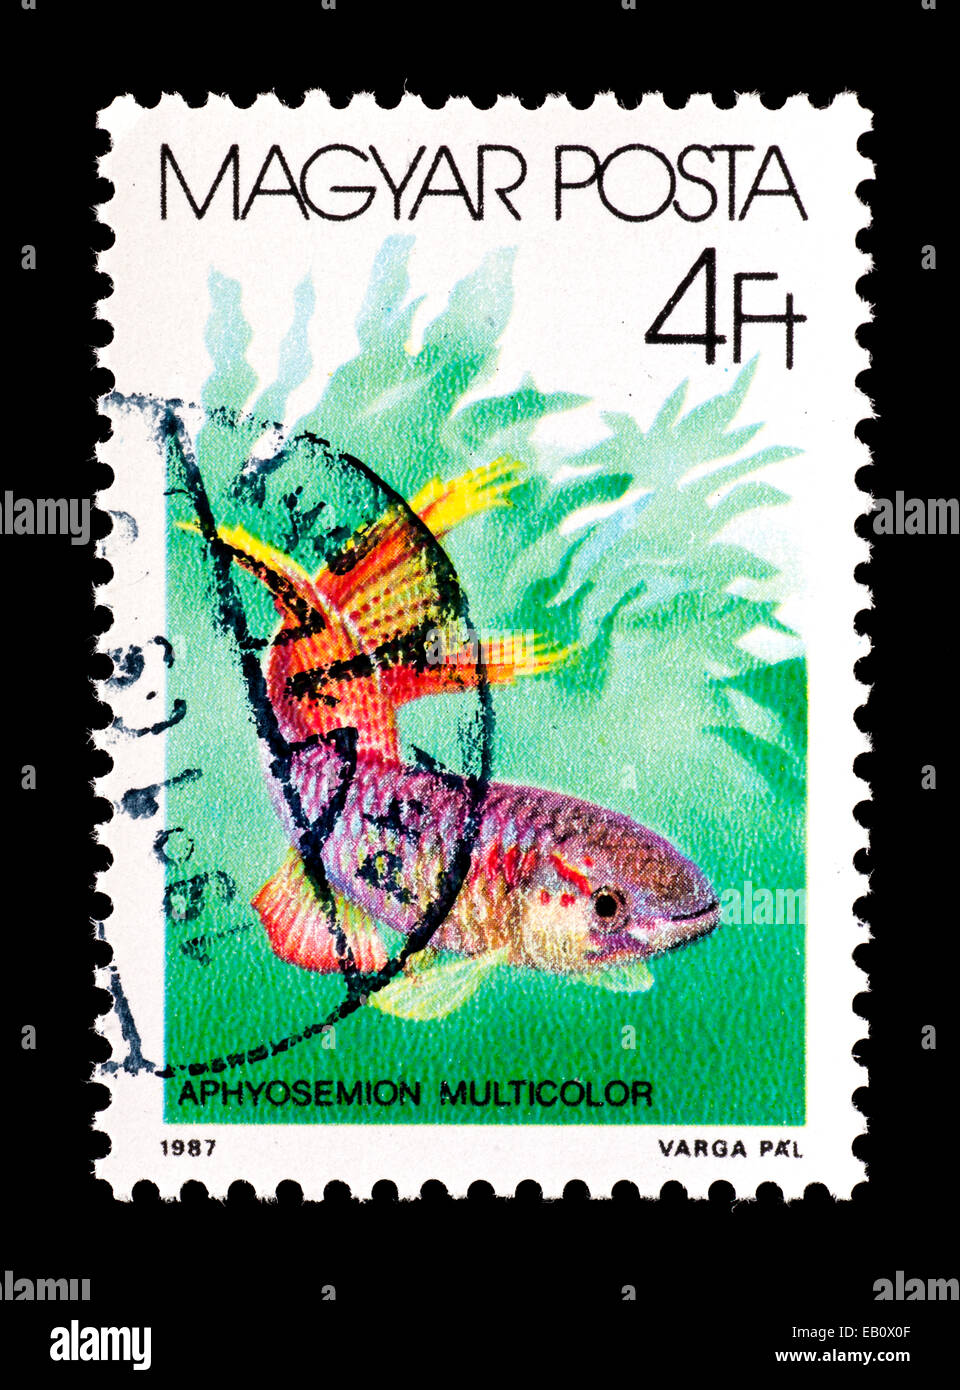 Postage stamp from Hungary depicting  Two-striped Aphyosemion fish (Aphyosemion multicolor) Stock Photo